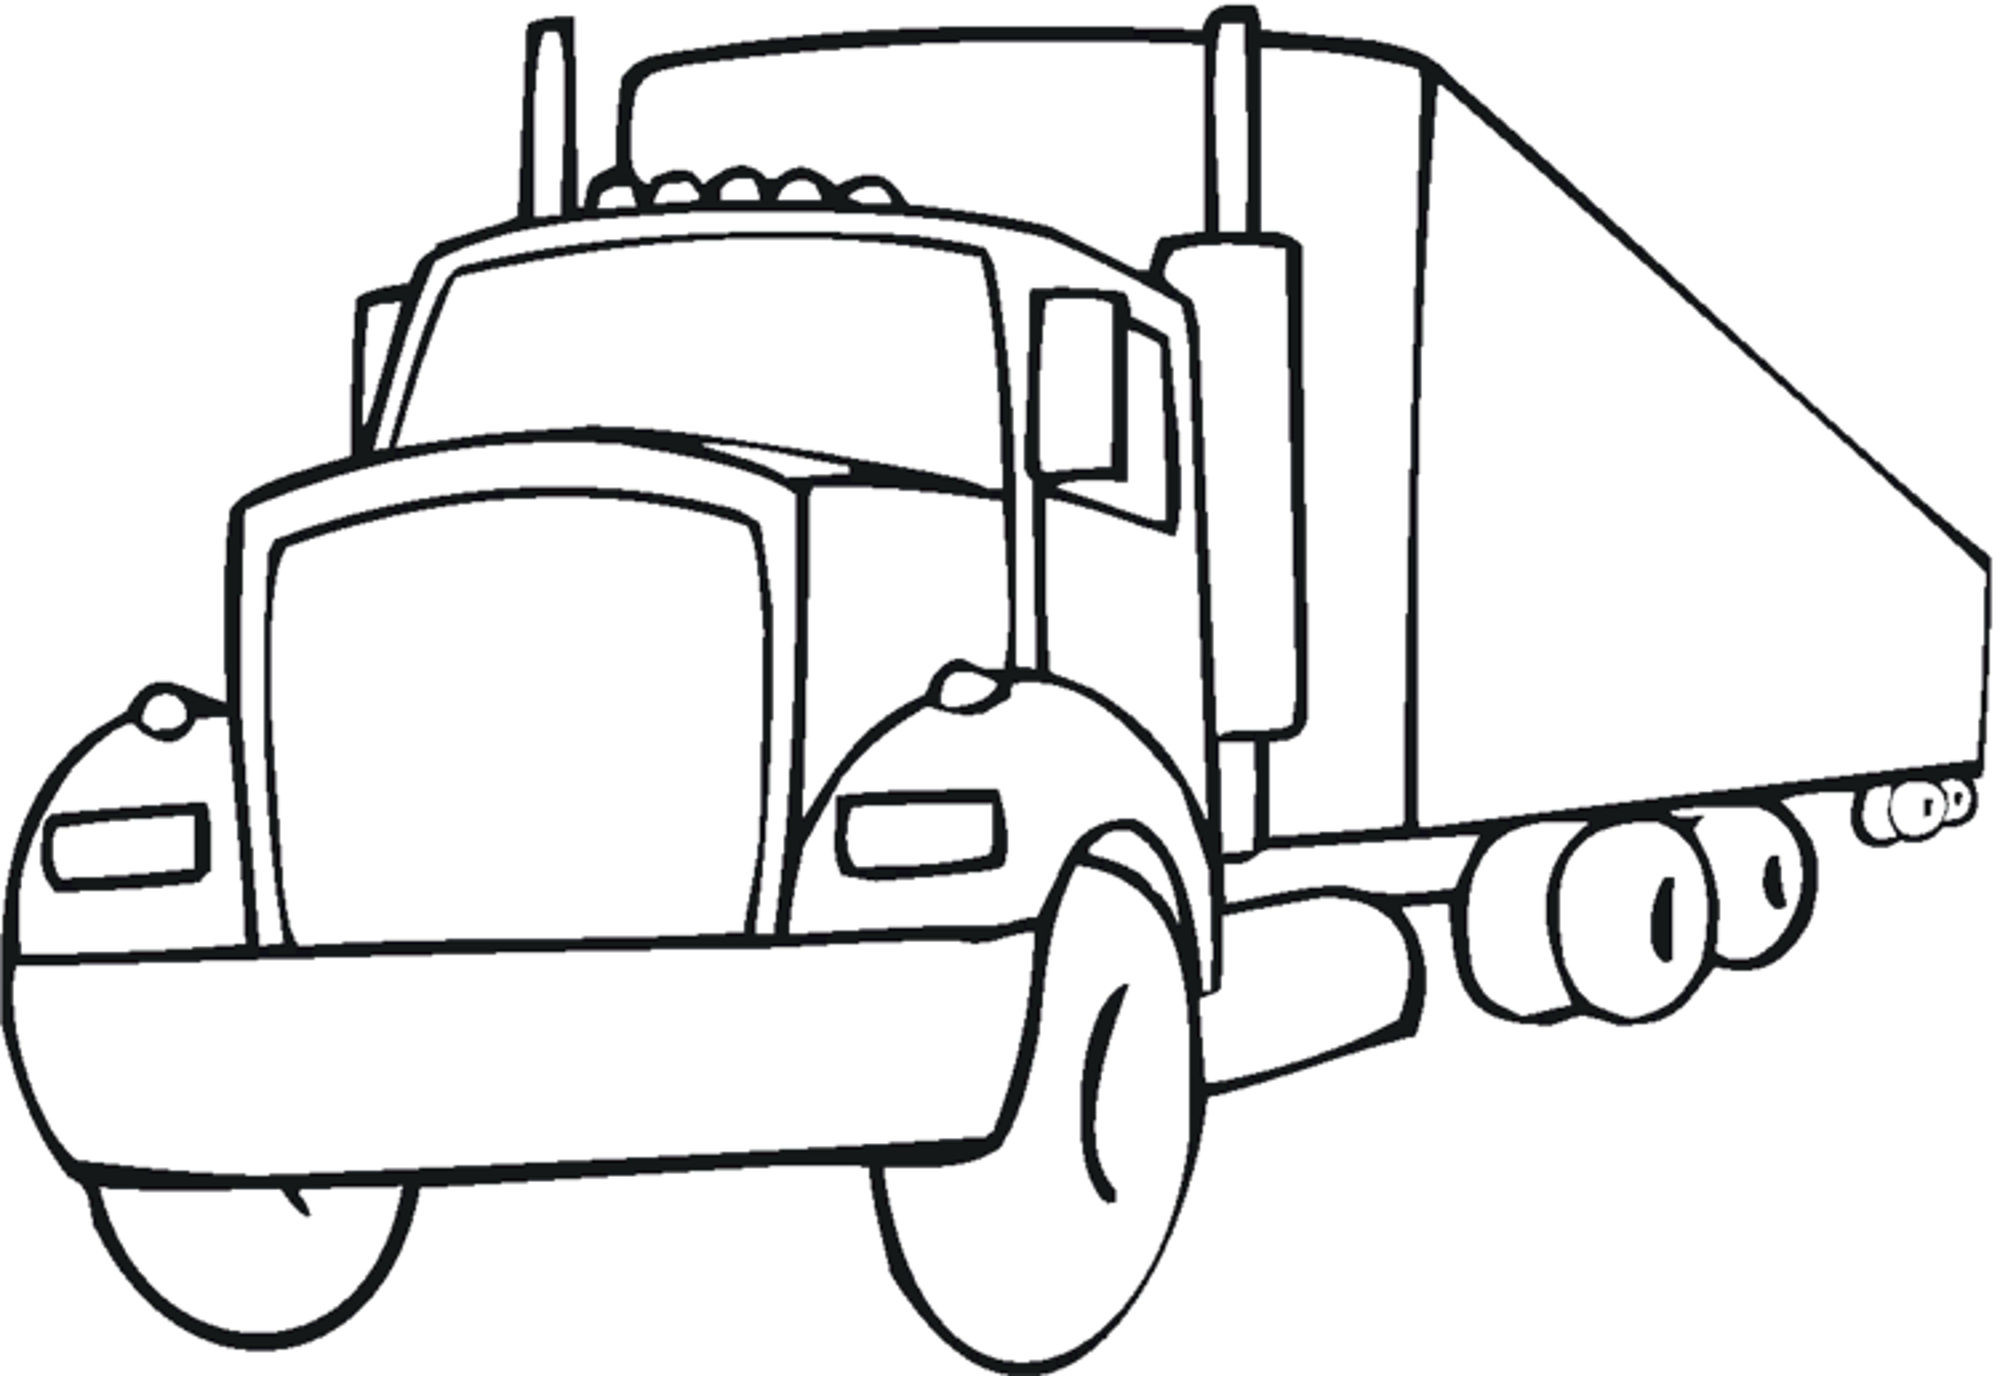 Easy Coloring Pages For Boys
 Truck Coloring Pages